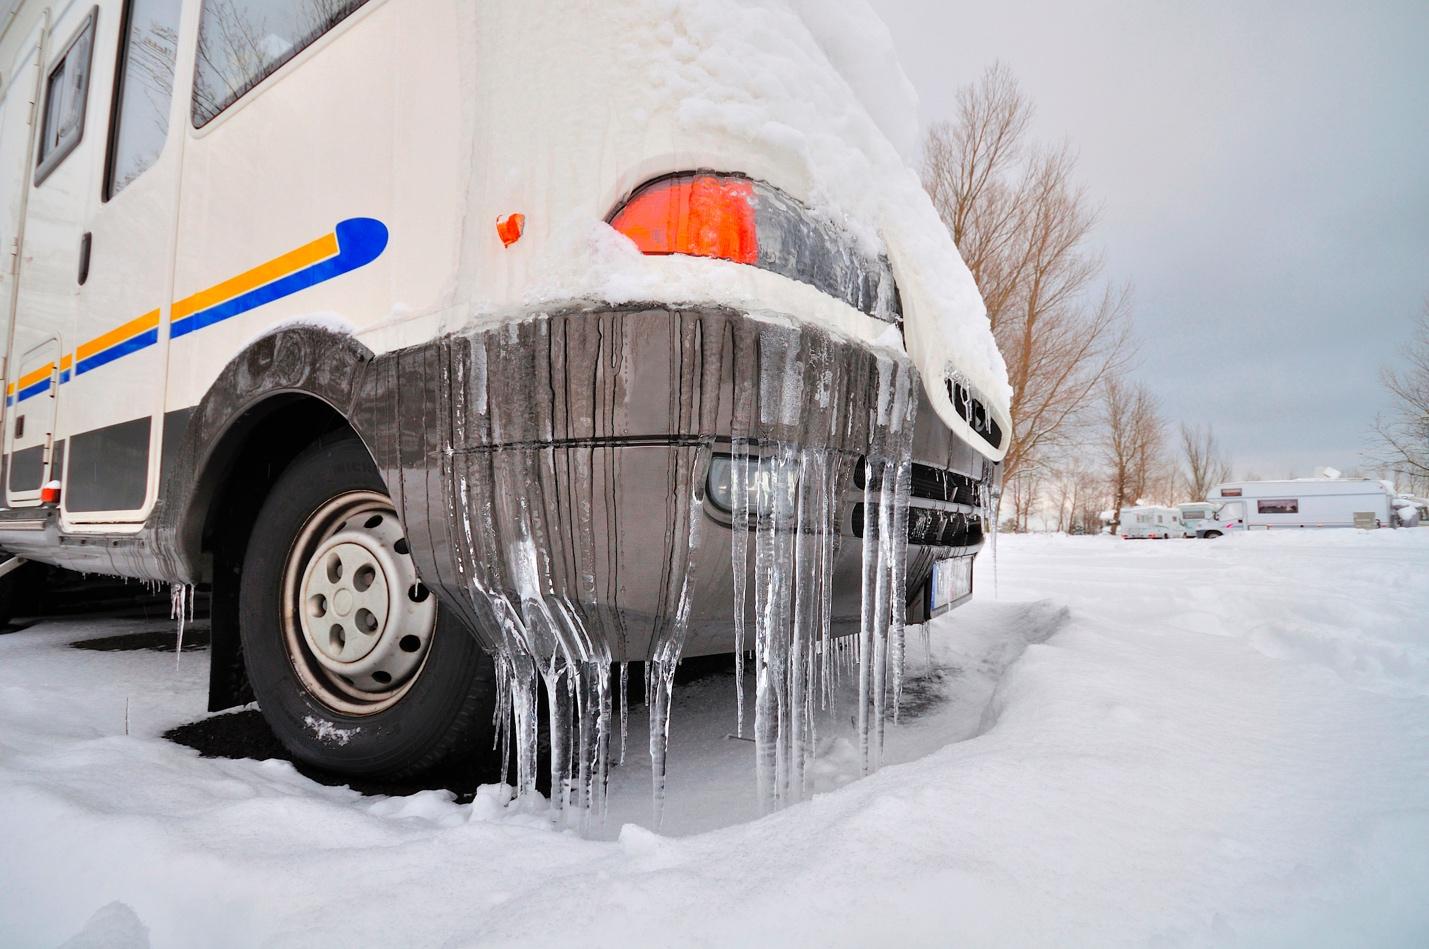 An RV parked in extreme conditions, noted most visibly by the icicles forming on its bumper.